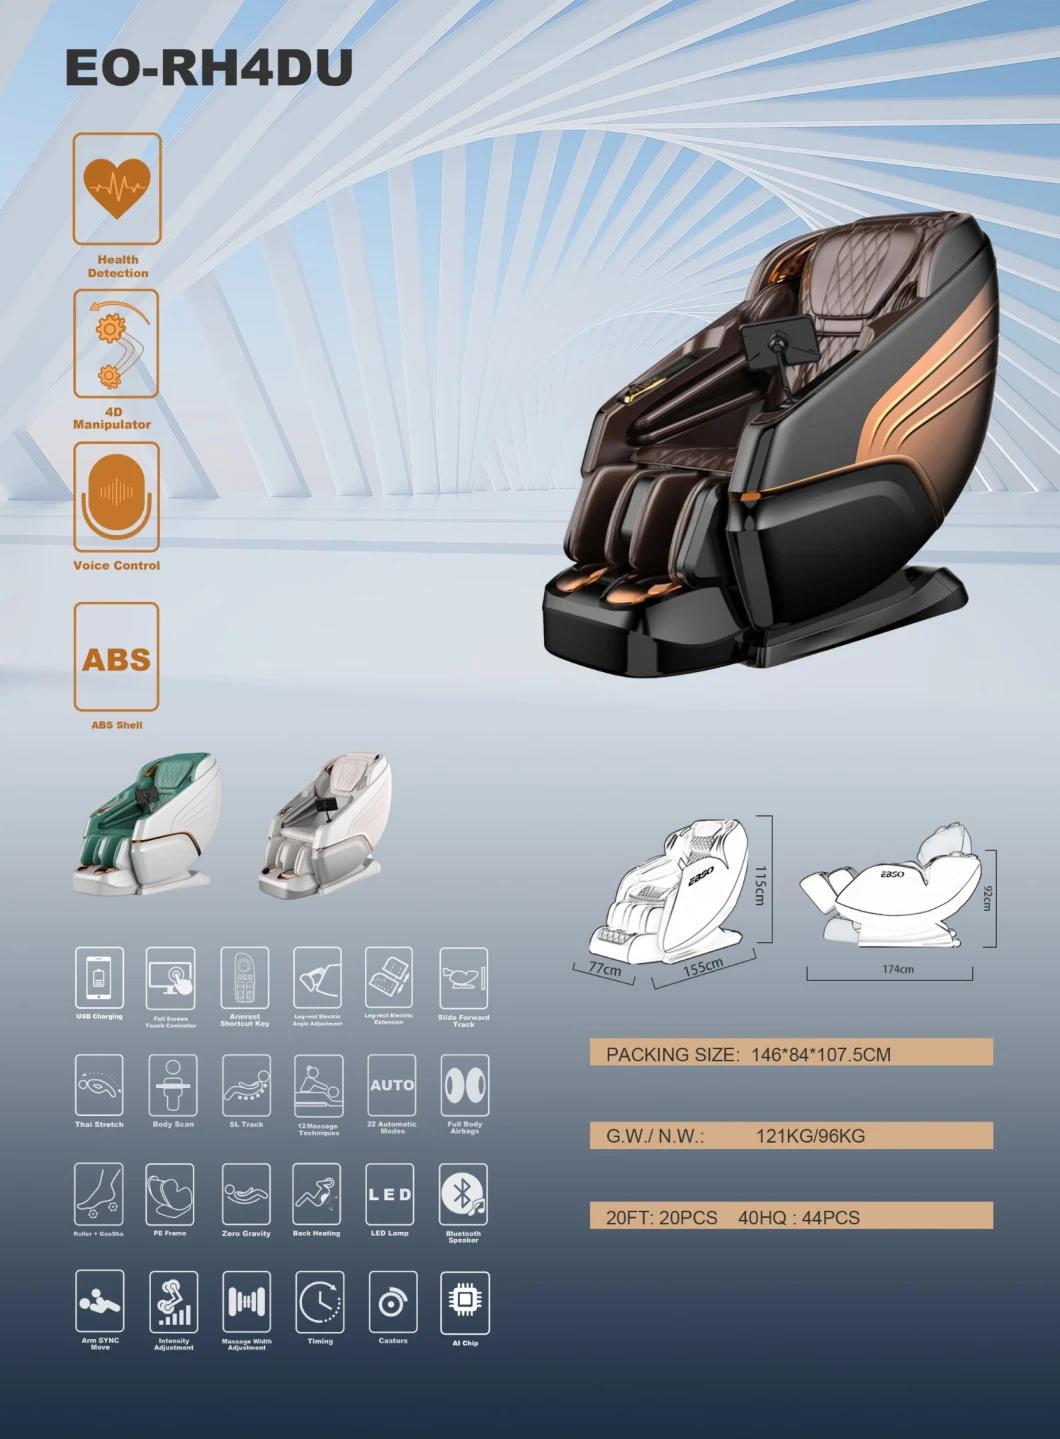 New Massager 2022 Body Scanning Massage Chair Fantasy X2 Massage Chair with Health Detection